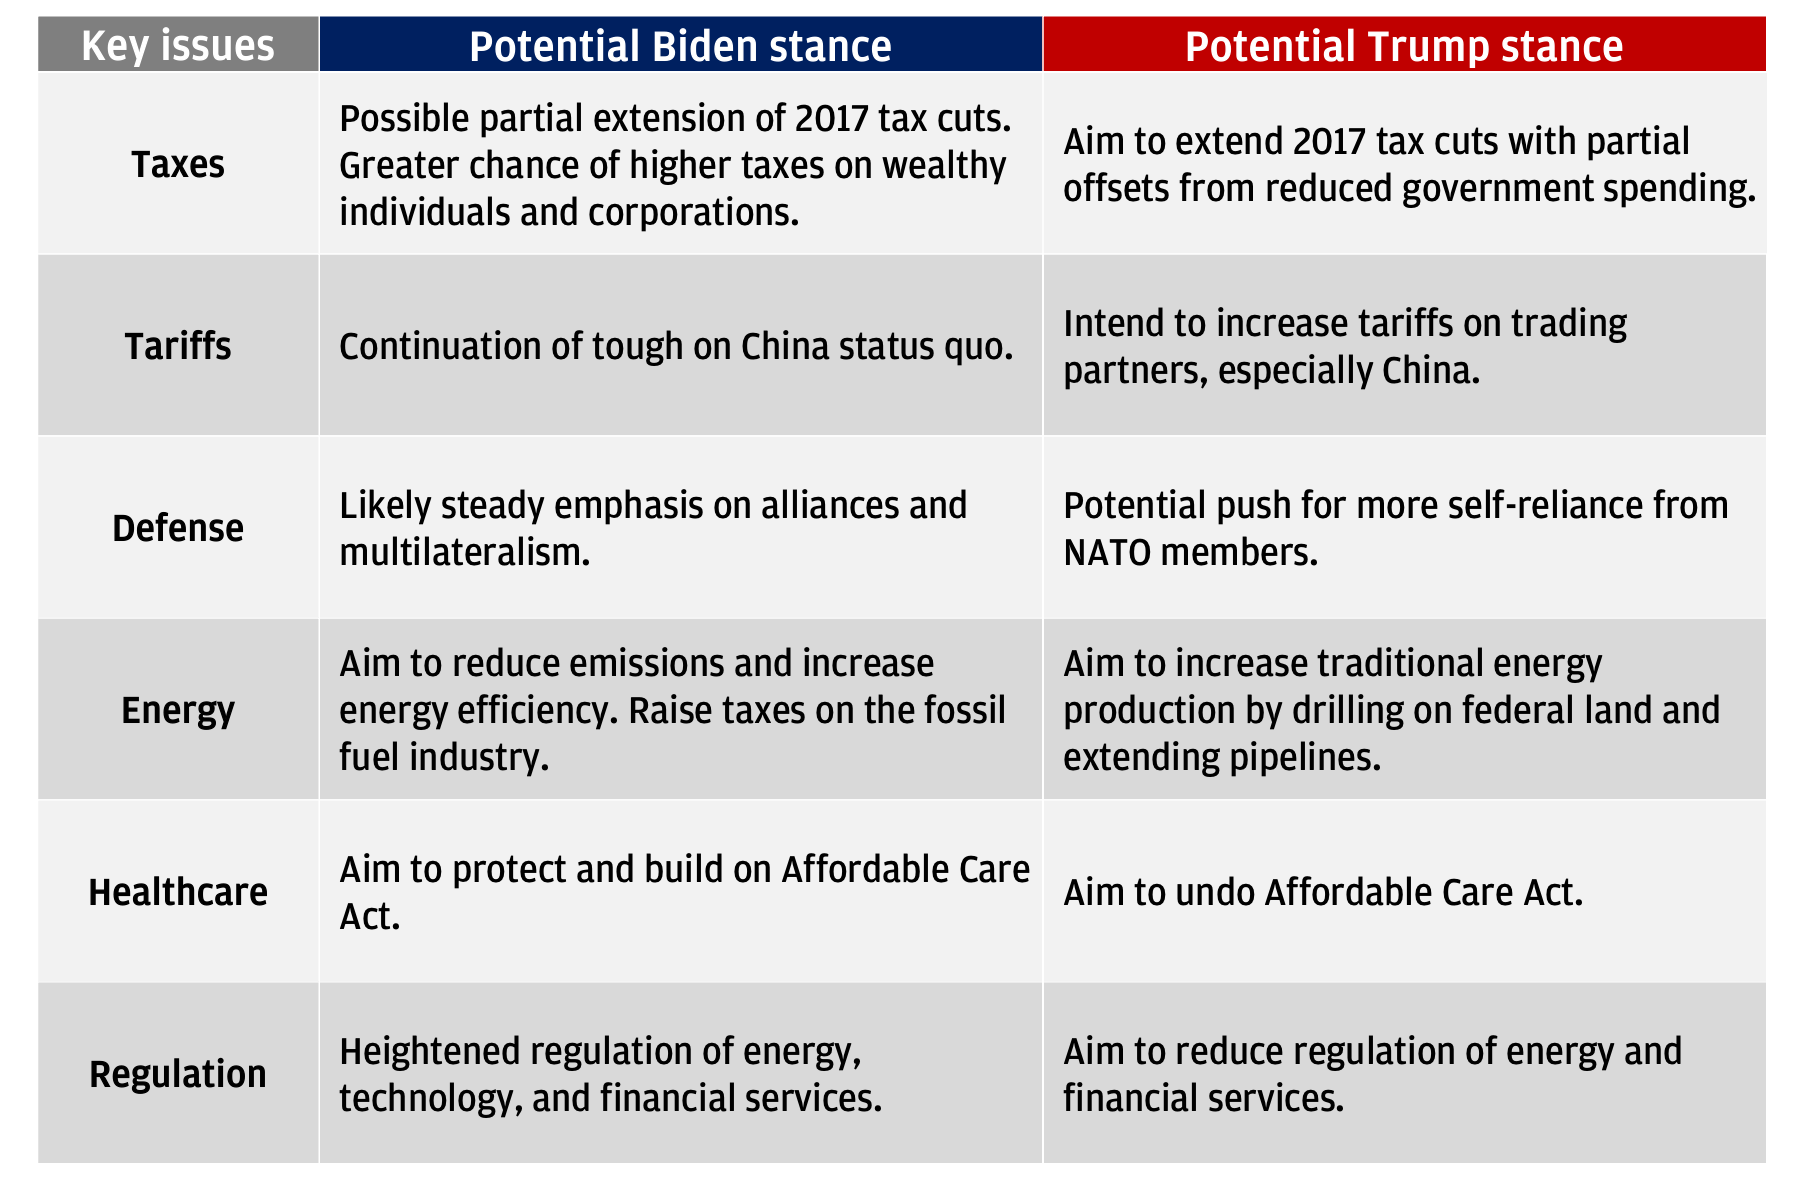 This table shows potential stances of President Biden and President Trump across the following key issues: taxes, tariffs, defense, energy, healthcare and regulation. 